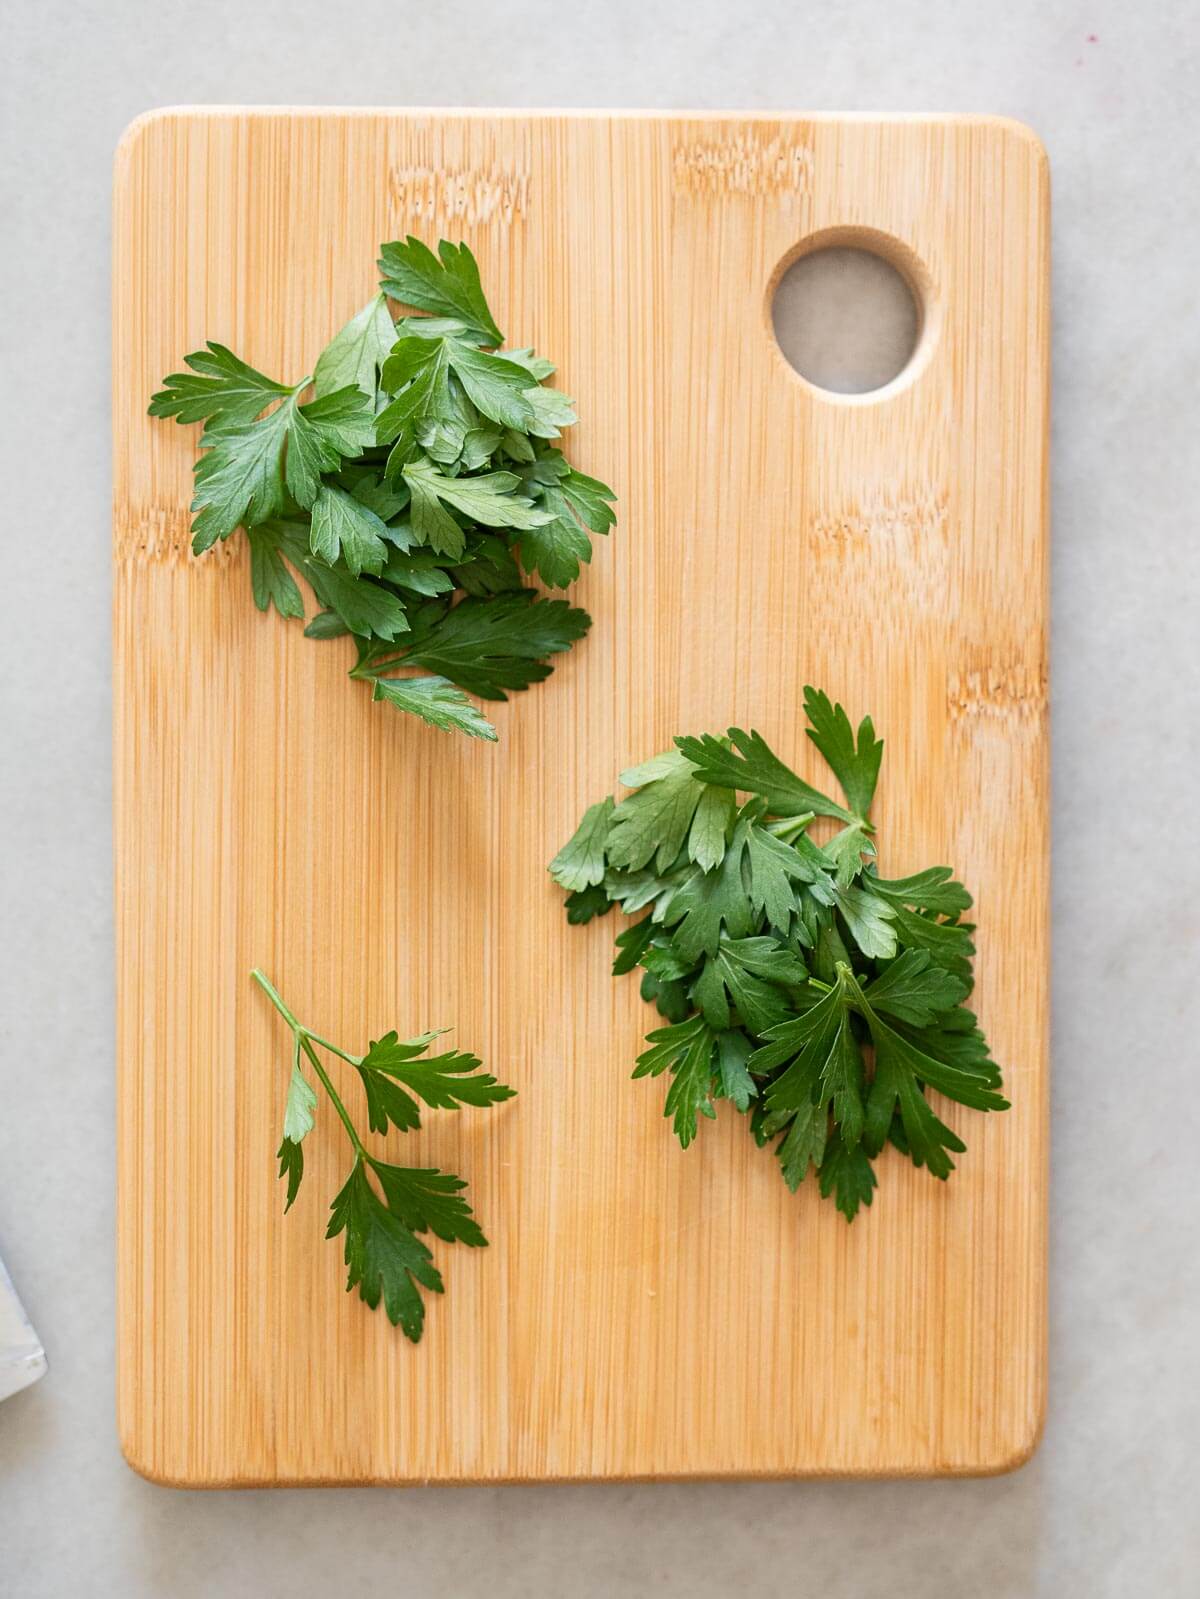 parsley leaves. Stems removed.